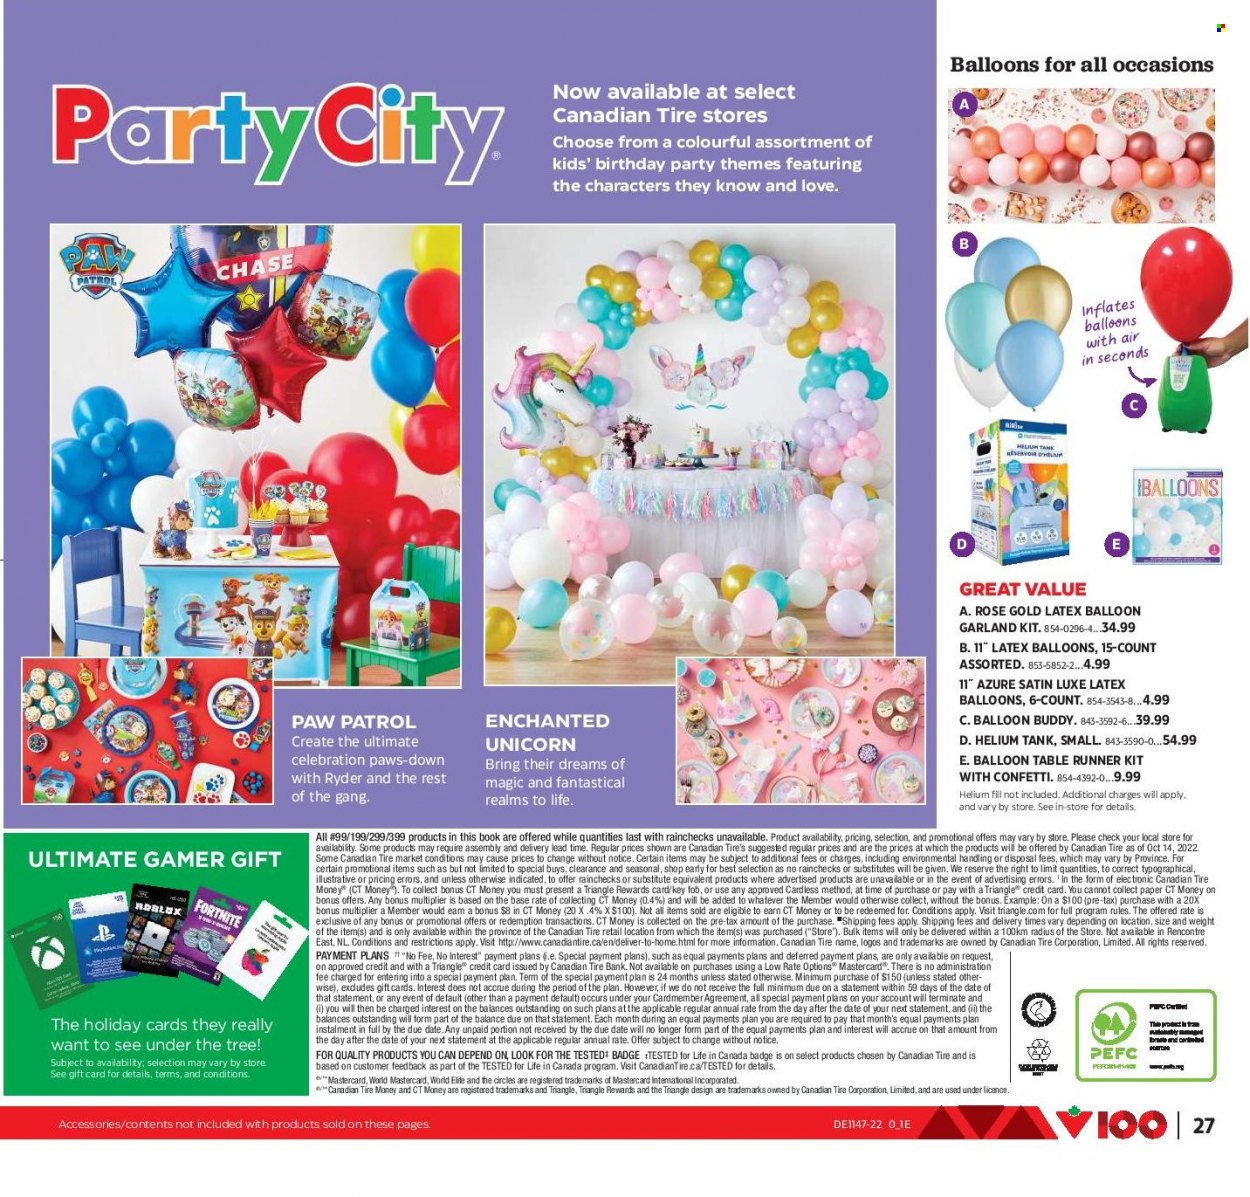 thumbnail - Canadian Tire Flyer - November 18, 2022 - December 08, 2022 - Sales products - paper, balloons, book, table runner, tank, Paws, garland, Paw Patrol. Page 27.